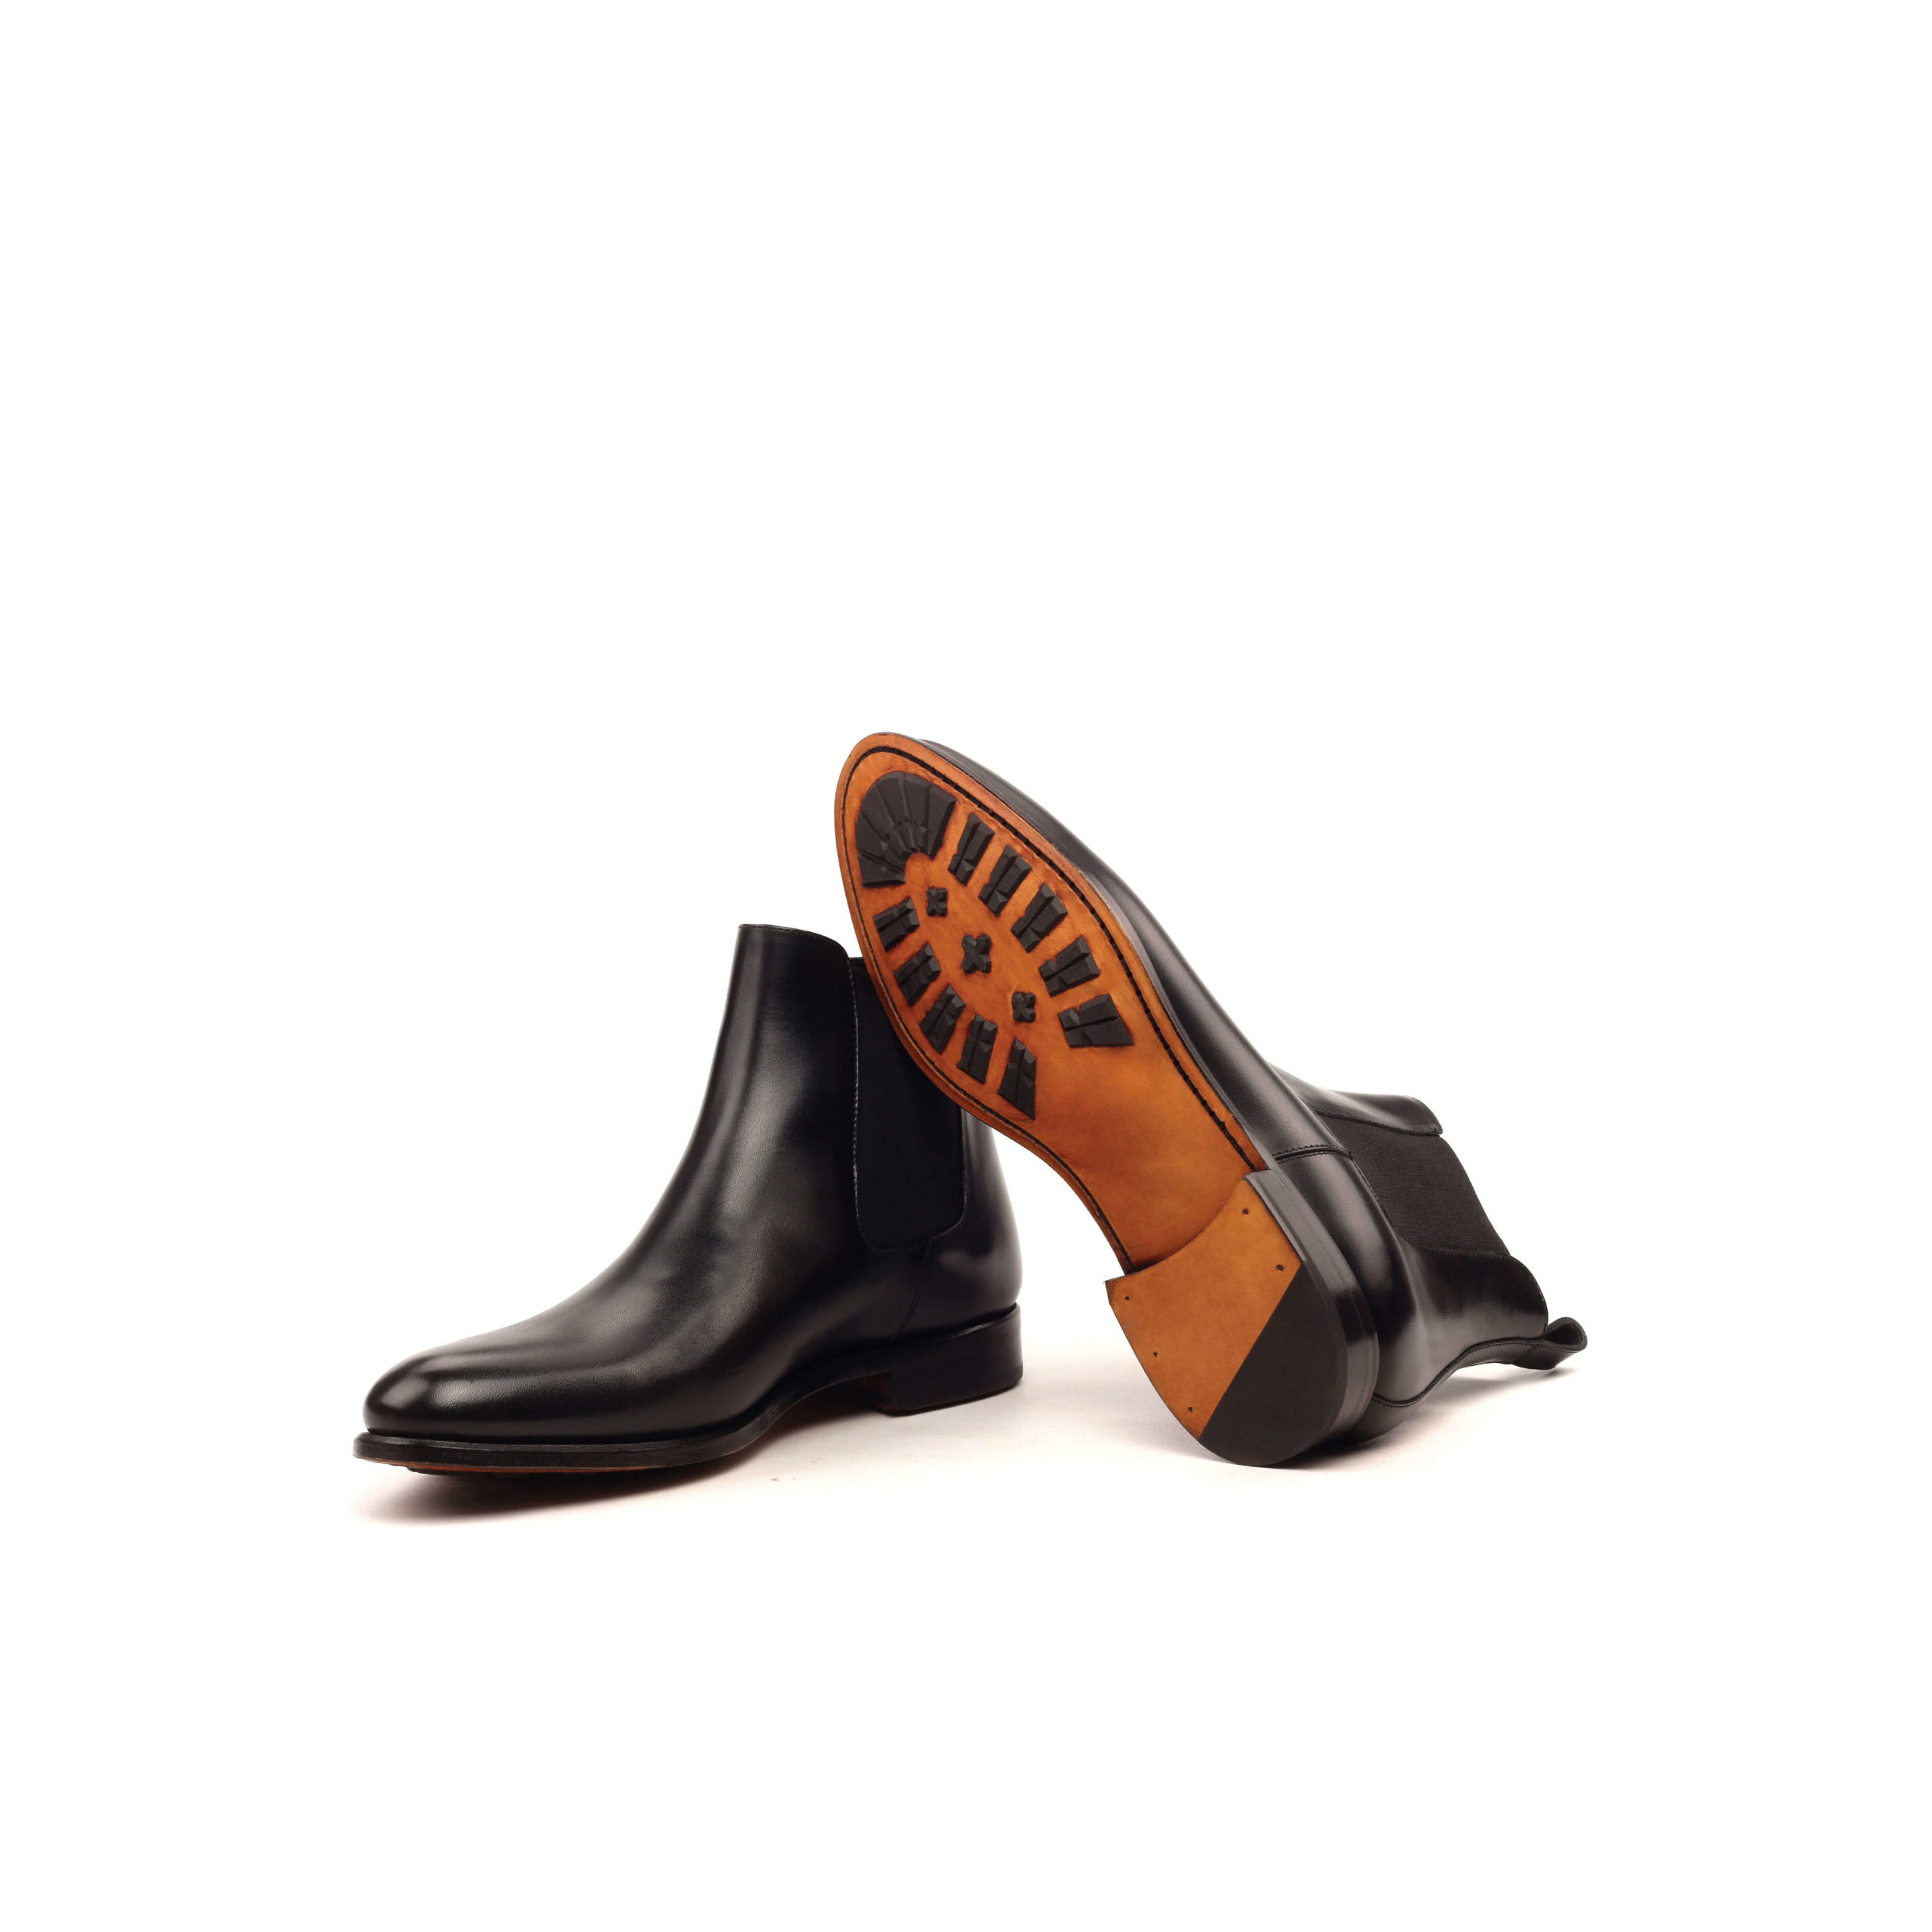 Ernest Chelsea Boot Black Box Calf – People of the Seine